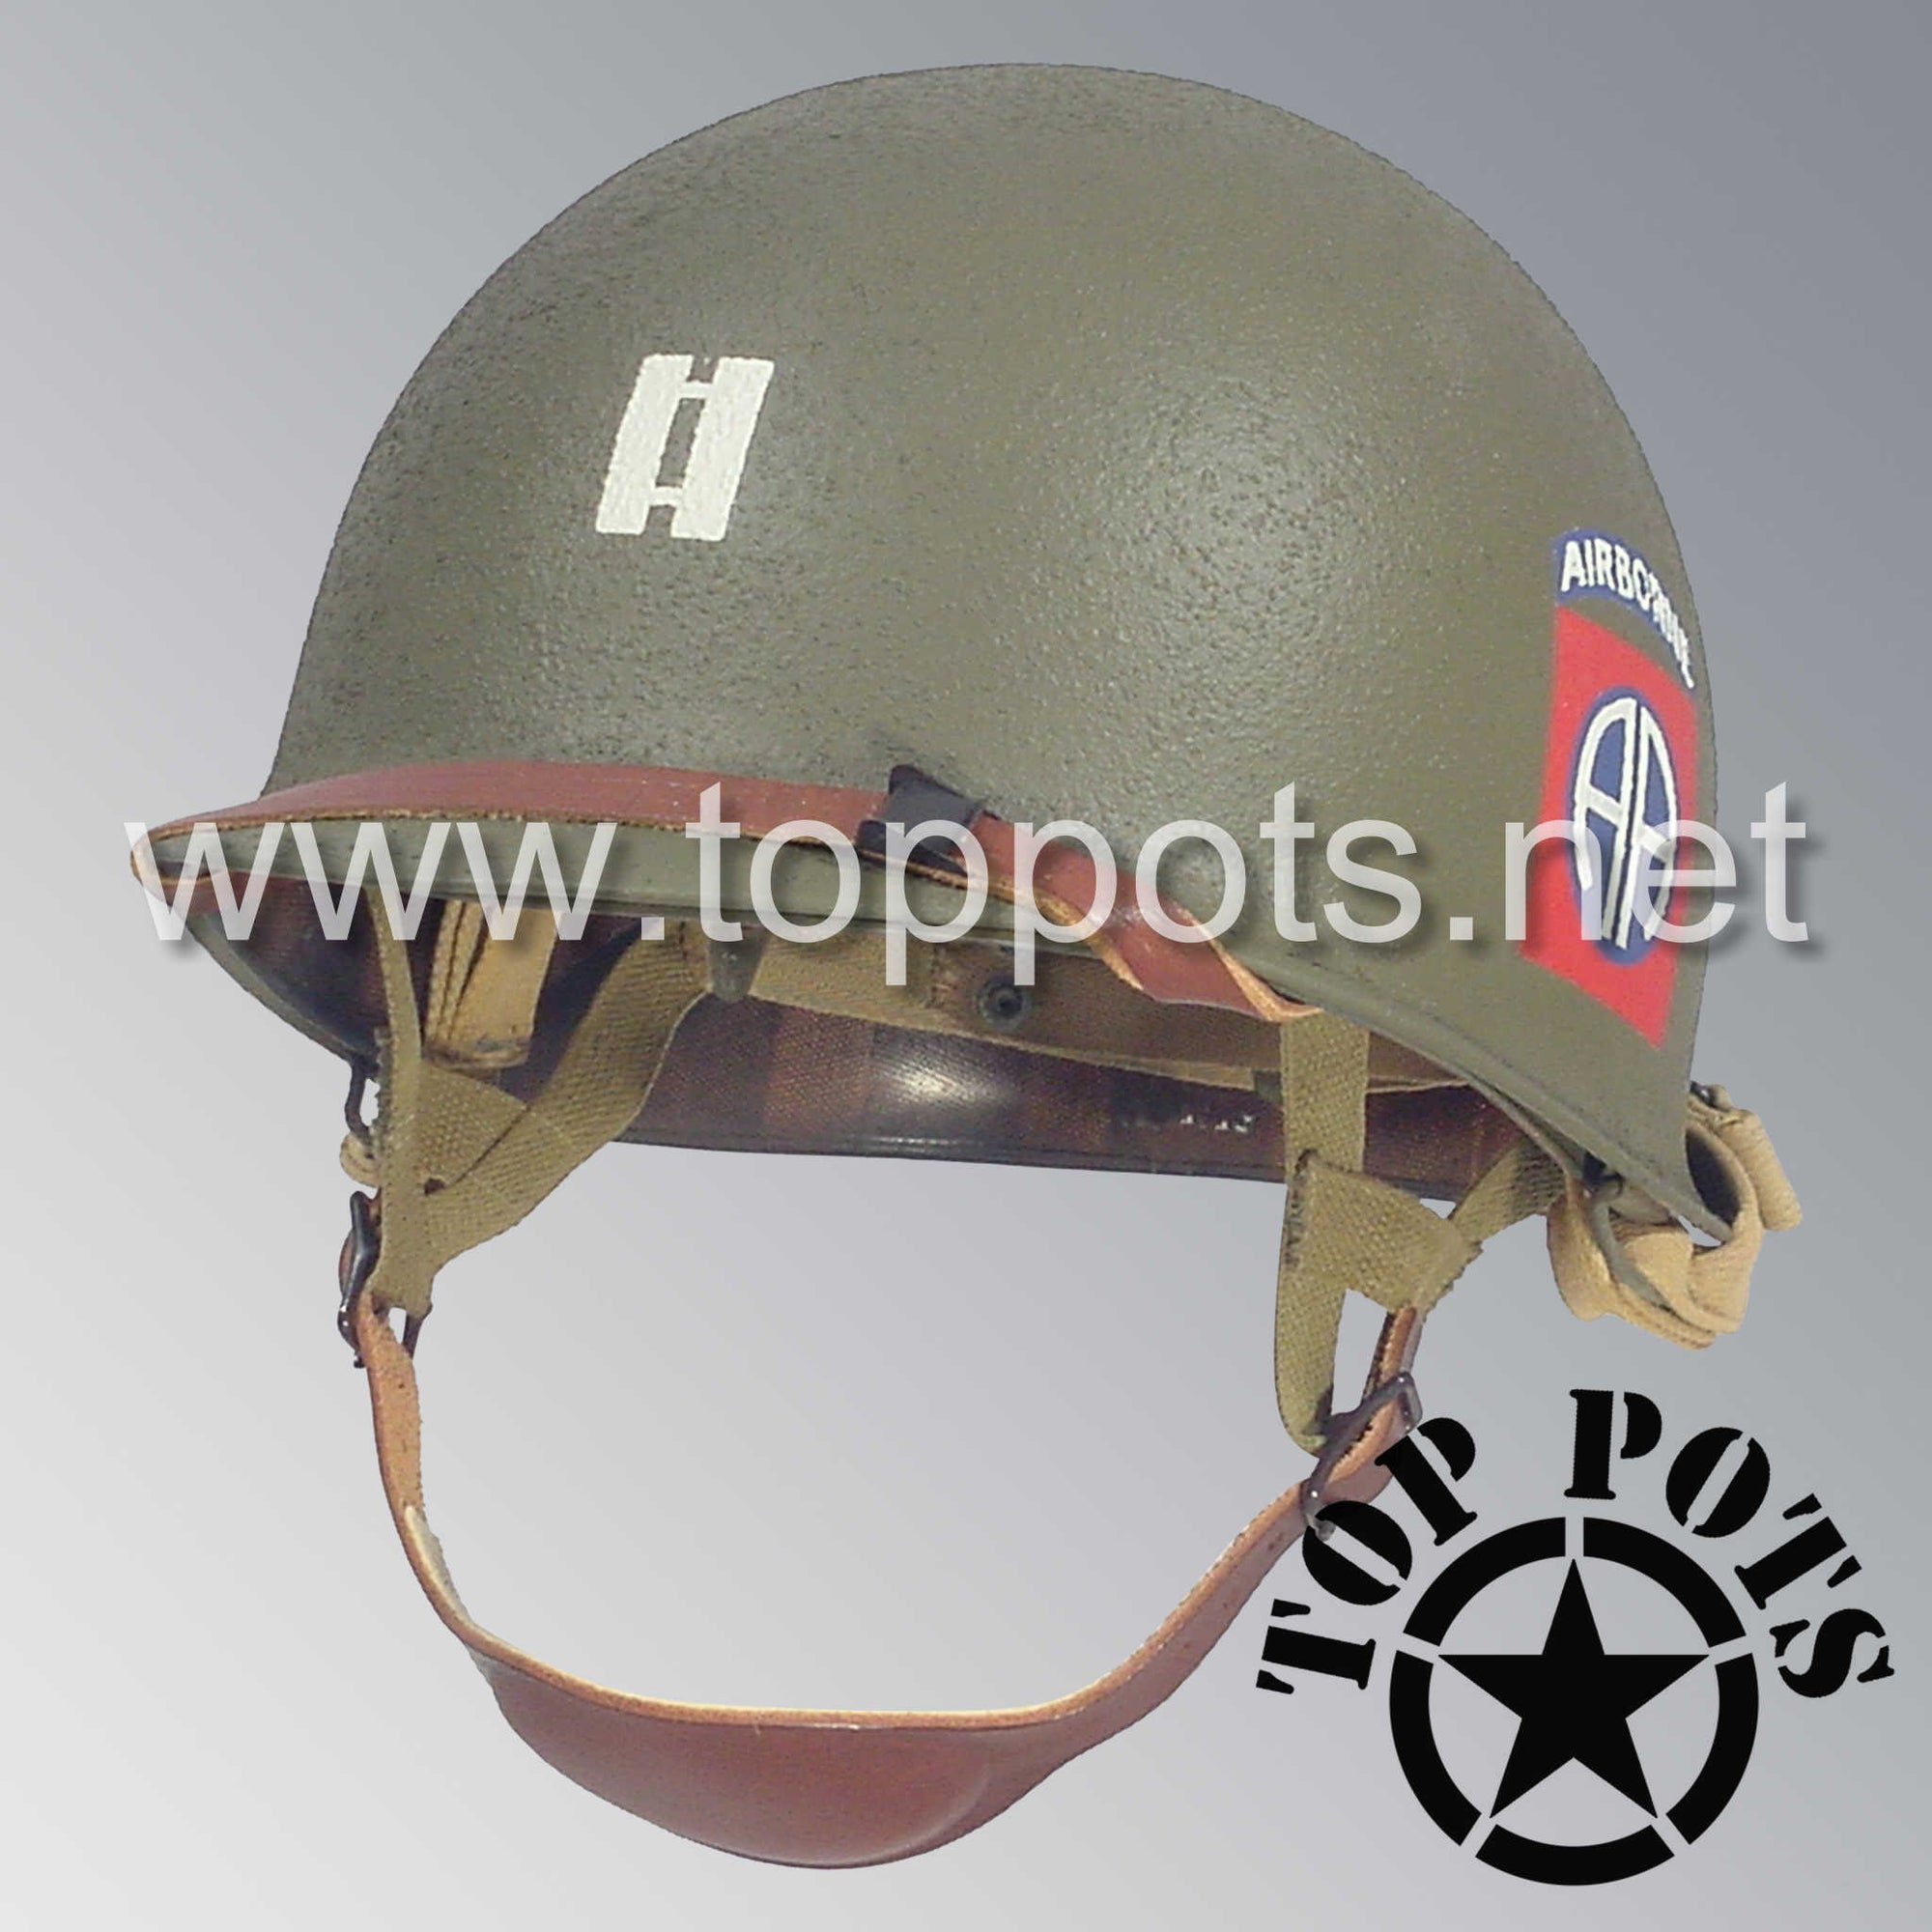 WWII US Army Restored Original M1C Paratrooper Airborne Helmet Swivel Bale Shell and Liner with 82nd Airborne 505th Officer Emblem